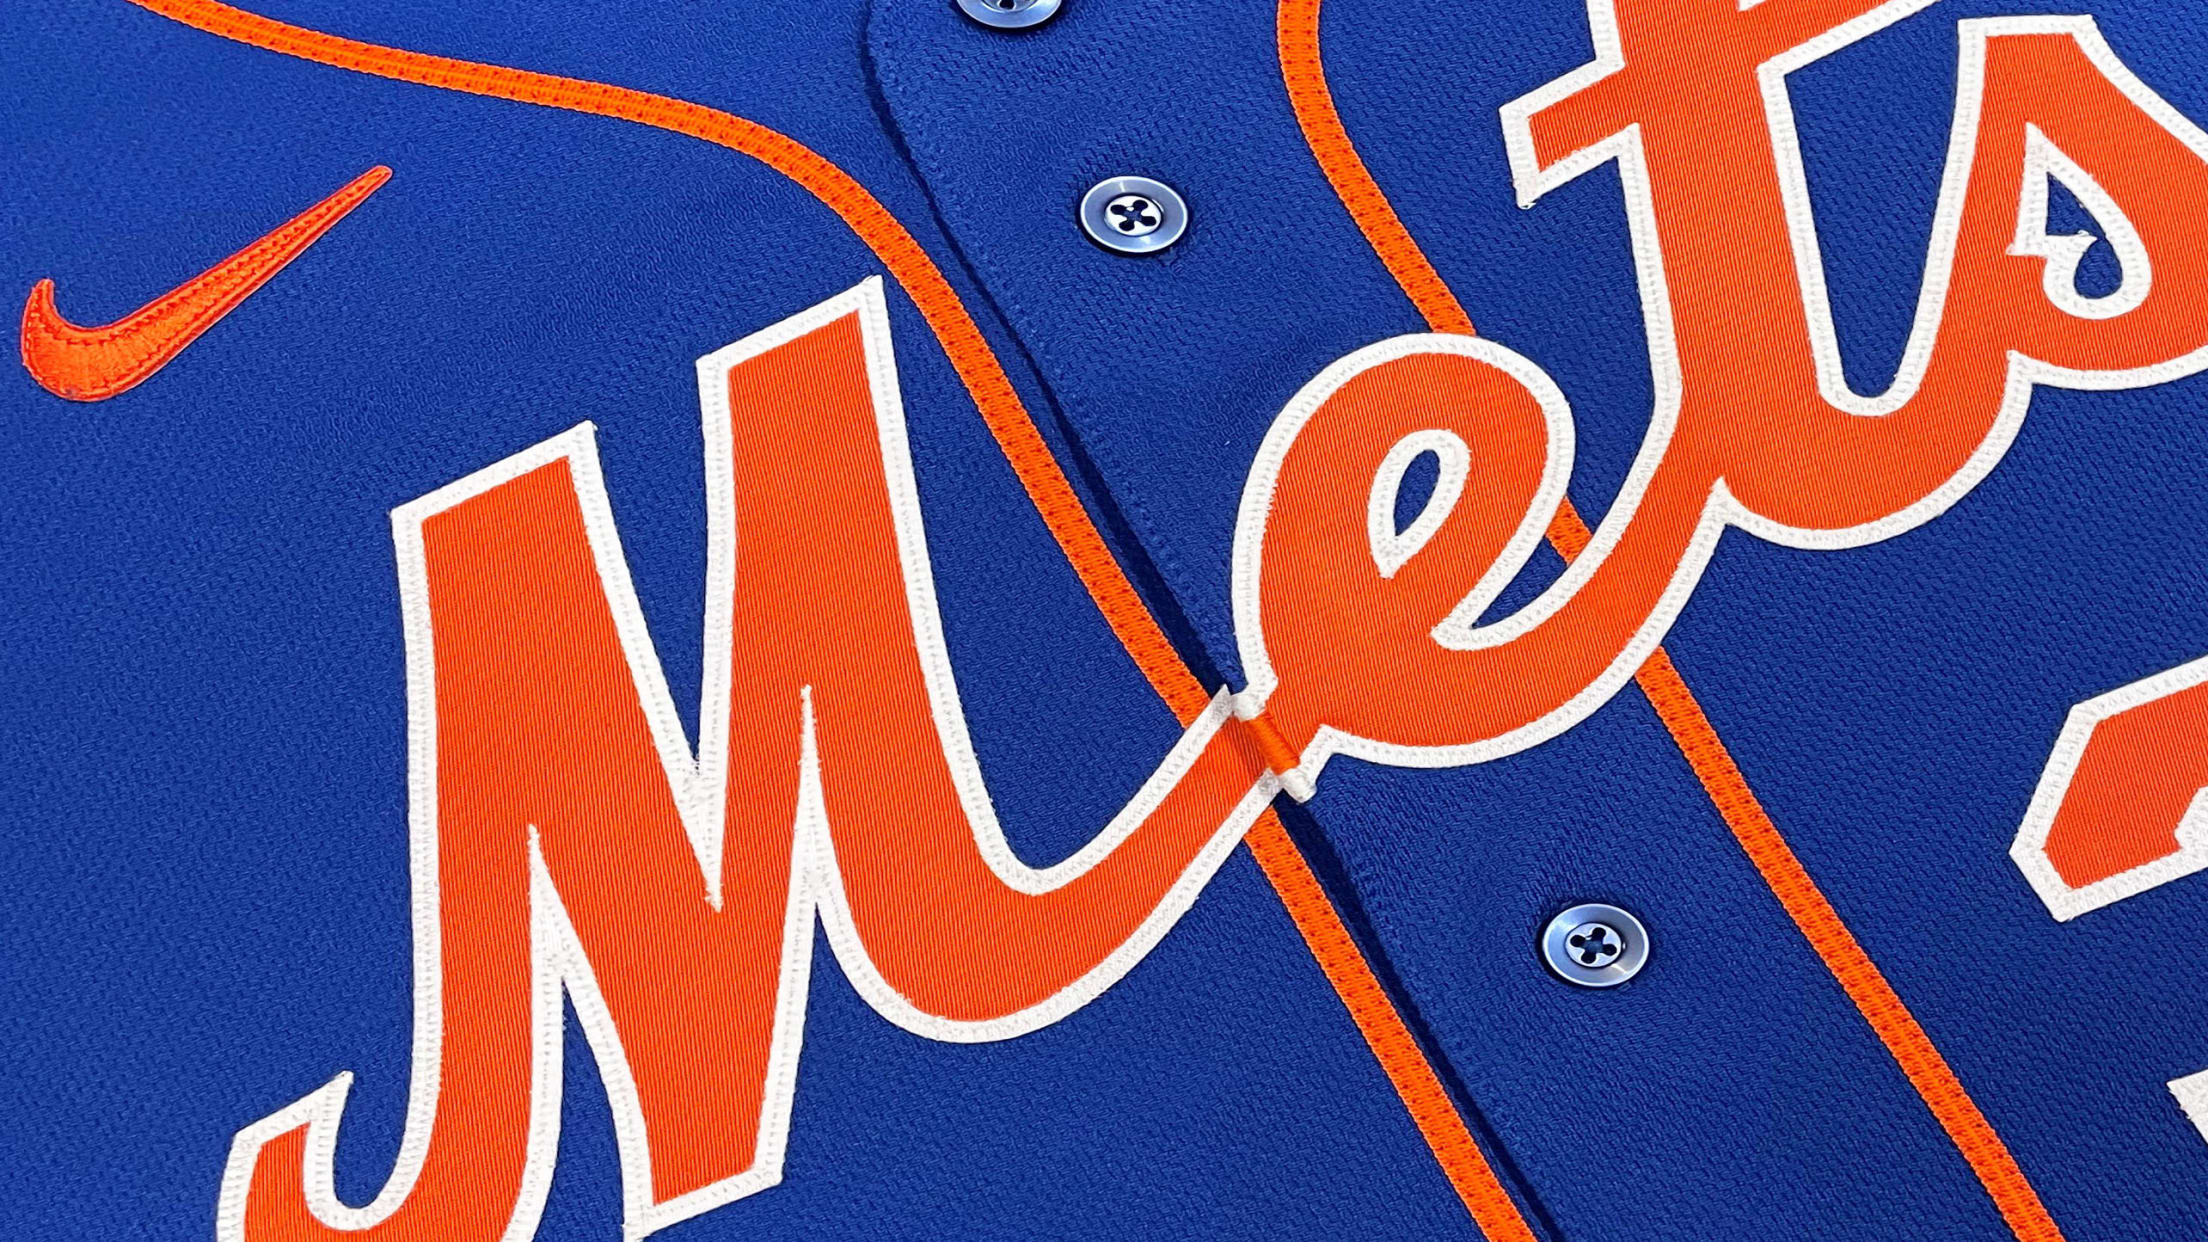 Game Used New York Mets , Game Used Mets Collectibles, Mets Game